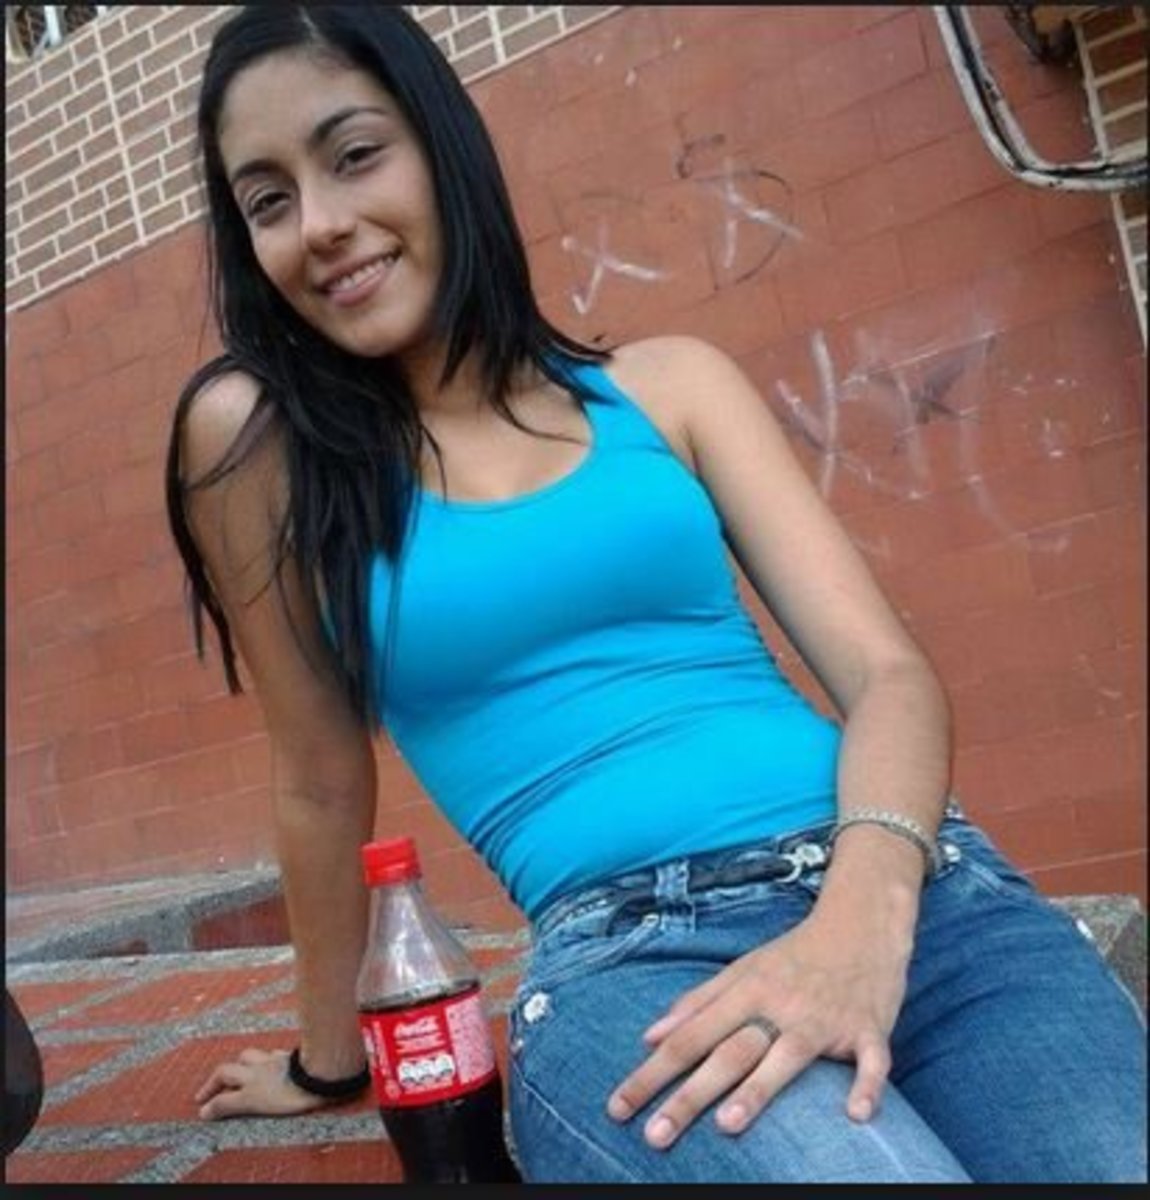 This is it, the average colombian girl. 